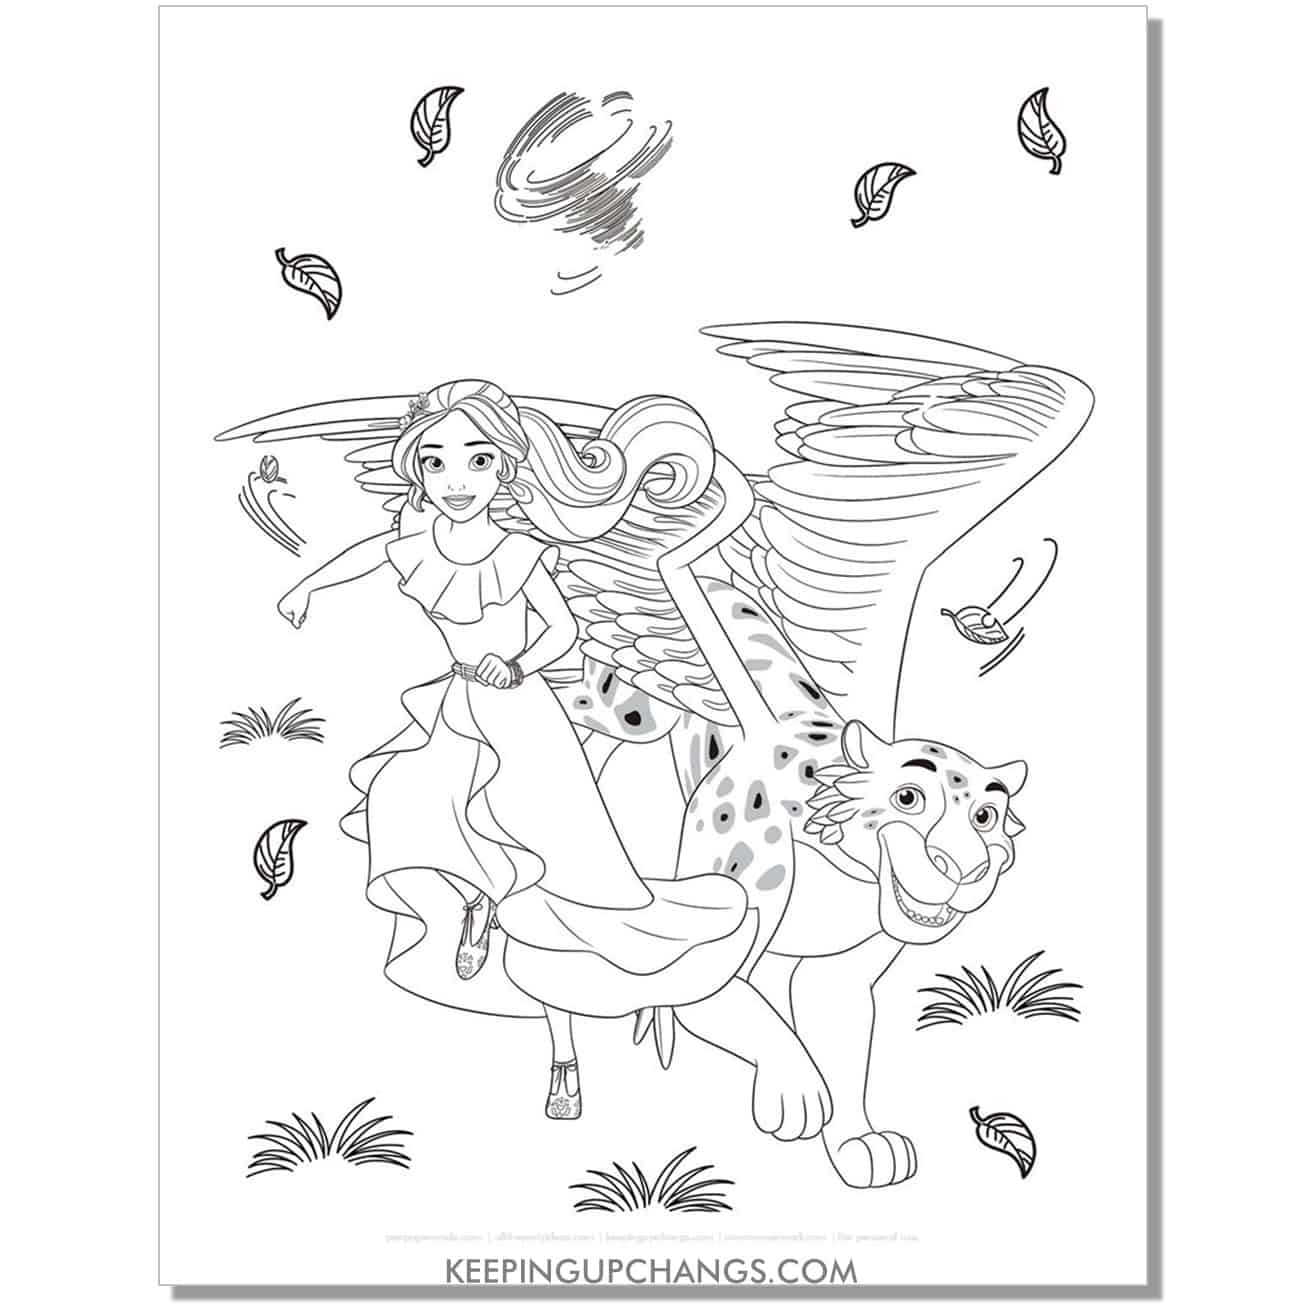 elena and jaquin with flying leaves coloring page, sheet.